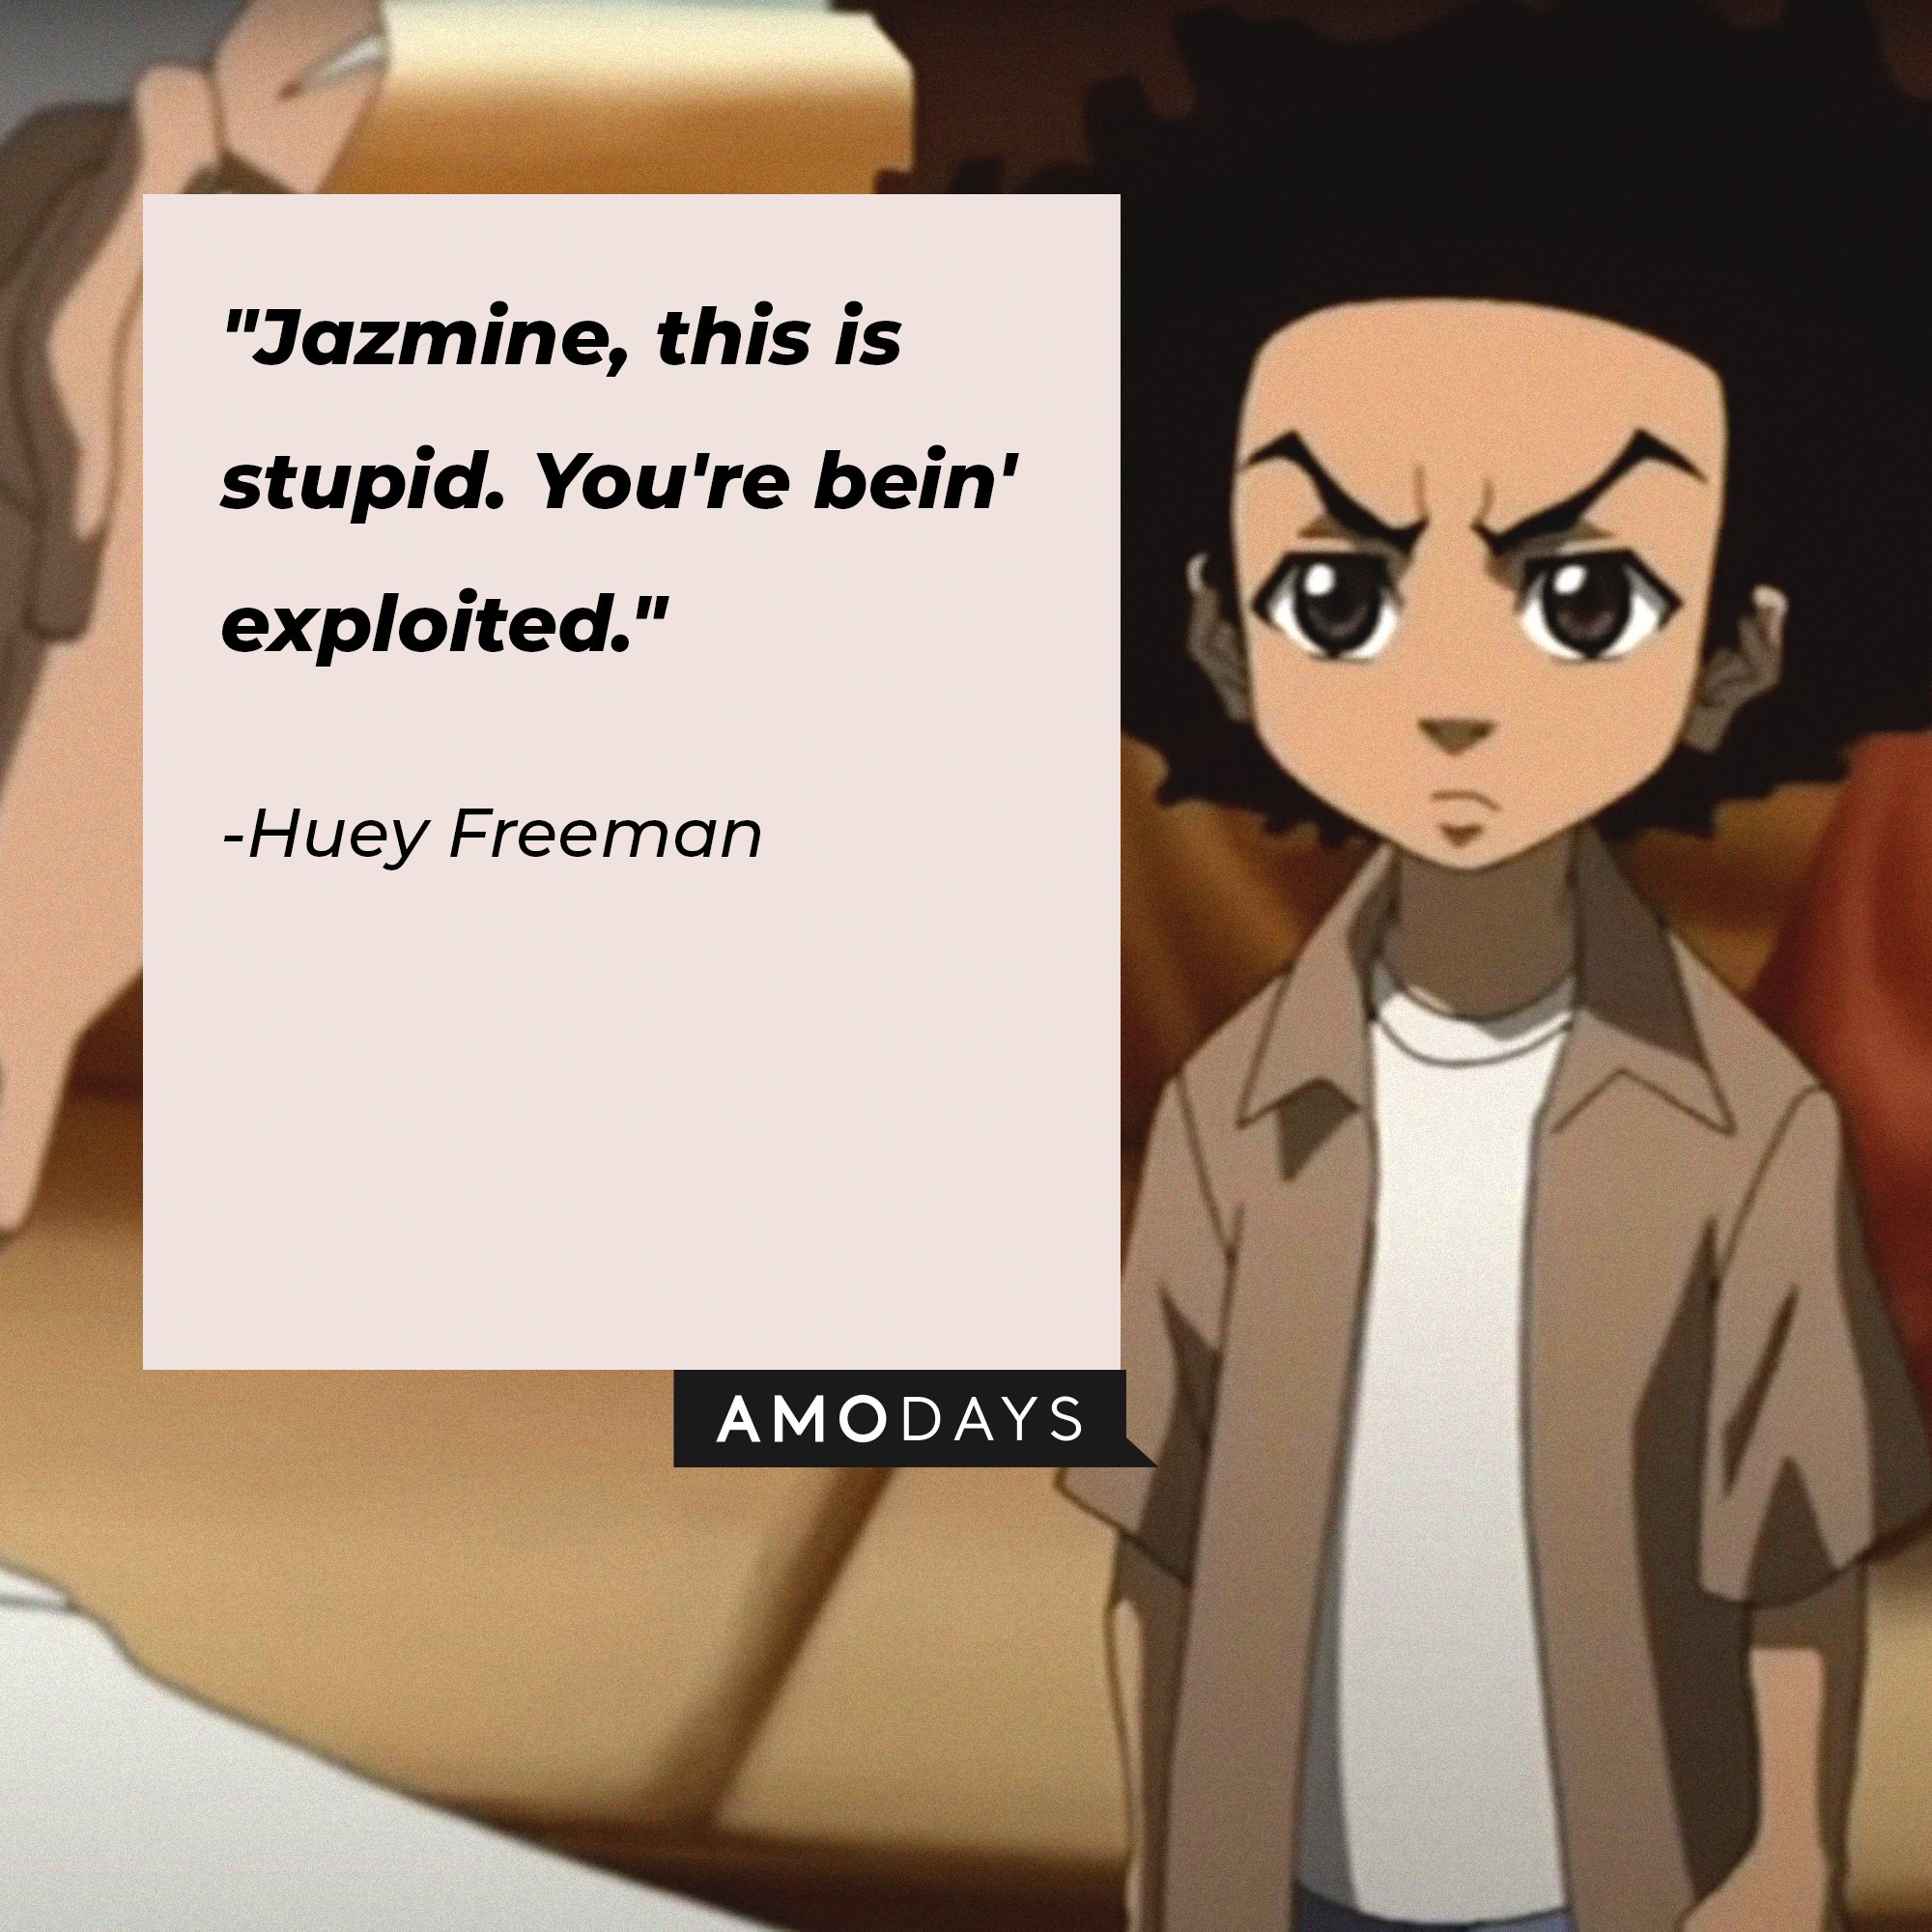 Huey Freeman's quote: "Jazmine, this is stupid. You're bein' exploited." | Image: AmoDays